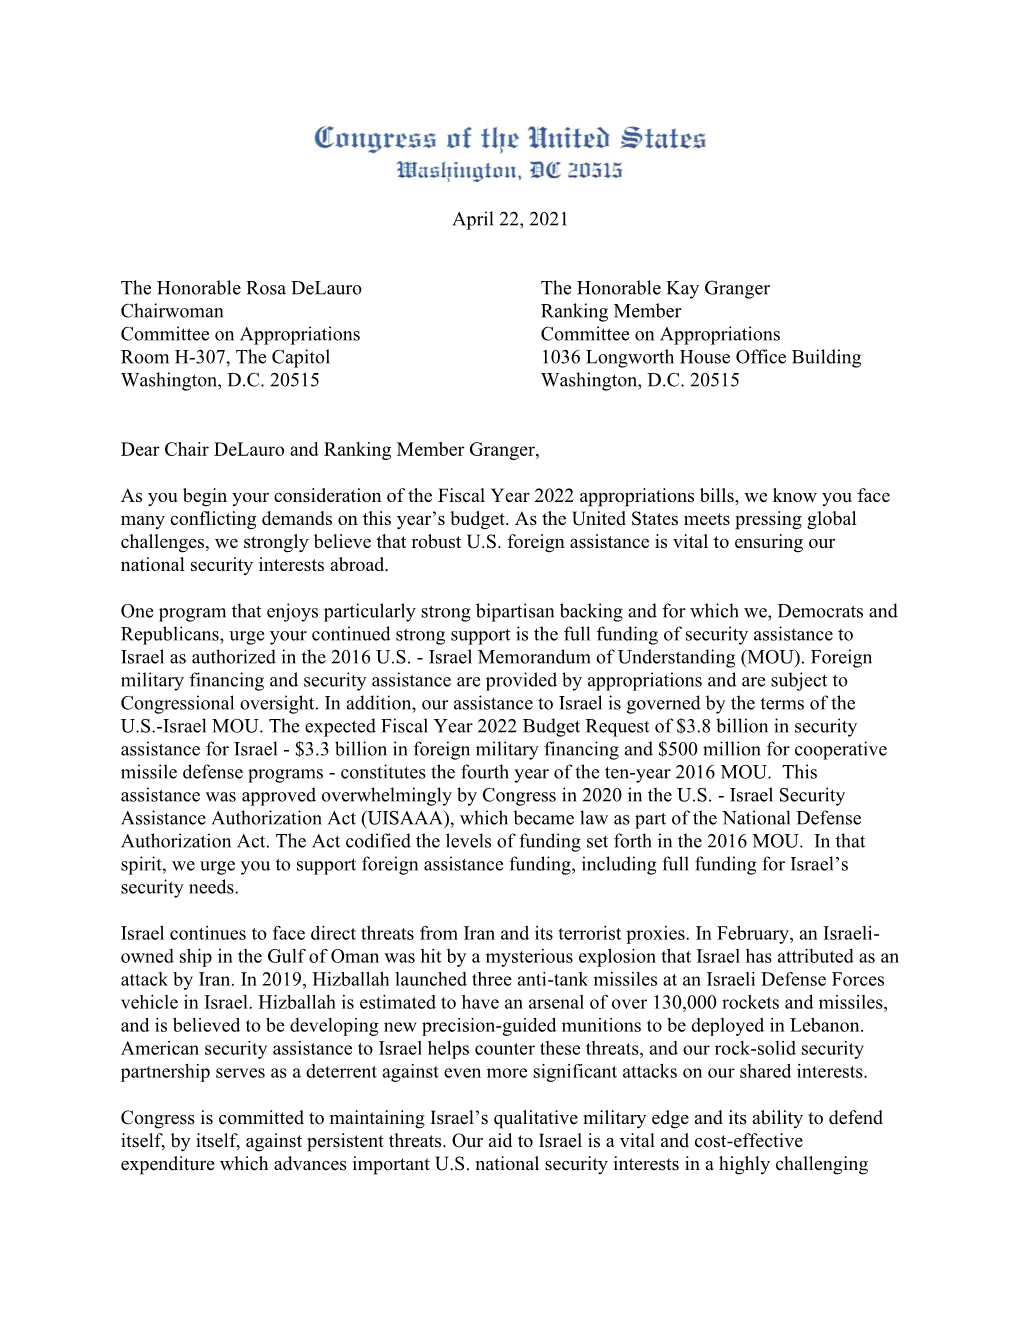 Letter Chair Delauro and Ranking Member Granger Page 4